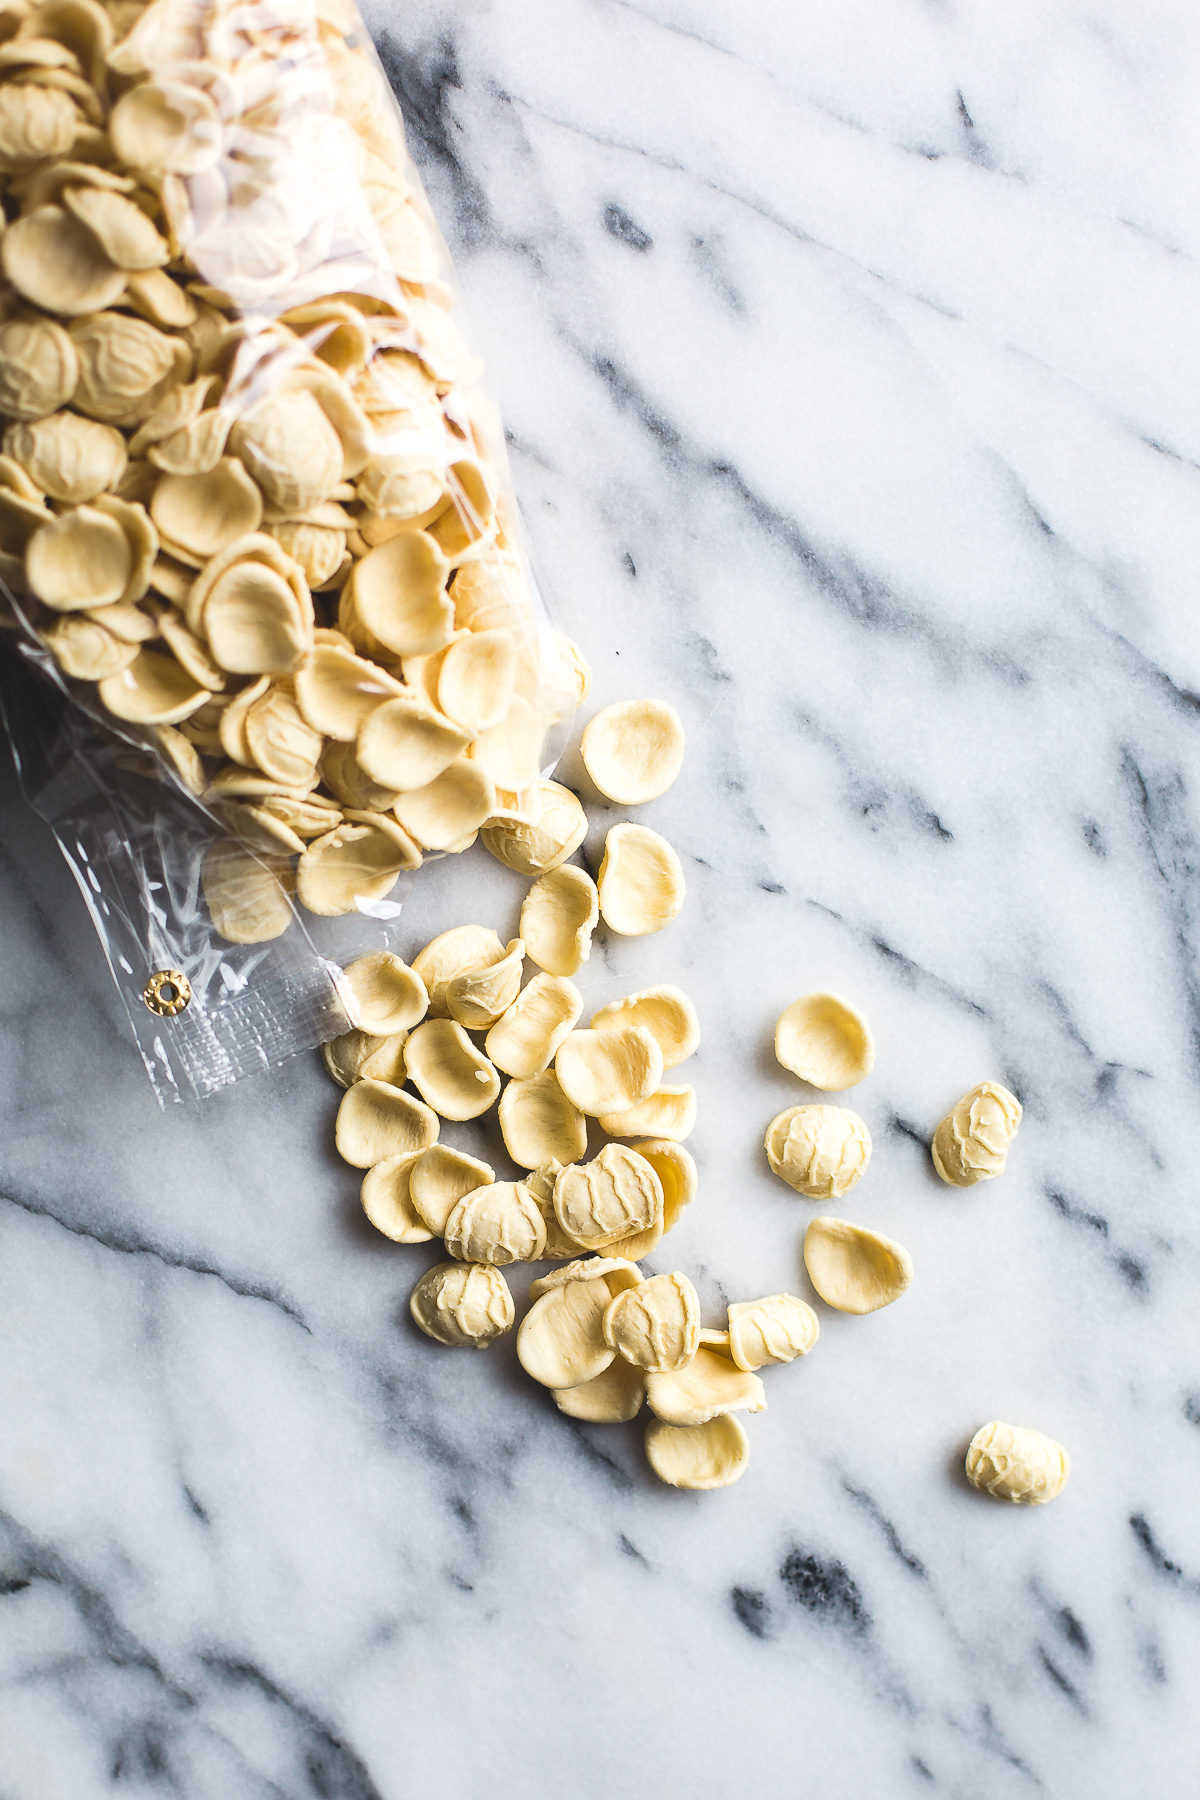 Orecchiette with Chickpeas Spinach and Feta is a simple and quick dinner that tastes incredible! In the time it takes to boil the pasta, you can prepare the rest of the ingredients and have dinner on the table in a flash. From @tasteLUVnourish #orecchiette #chickpeas #spinach #feta #easydinnerrecipes #pastarecipes